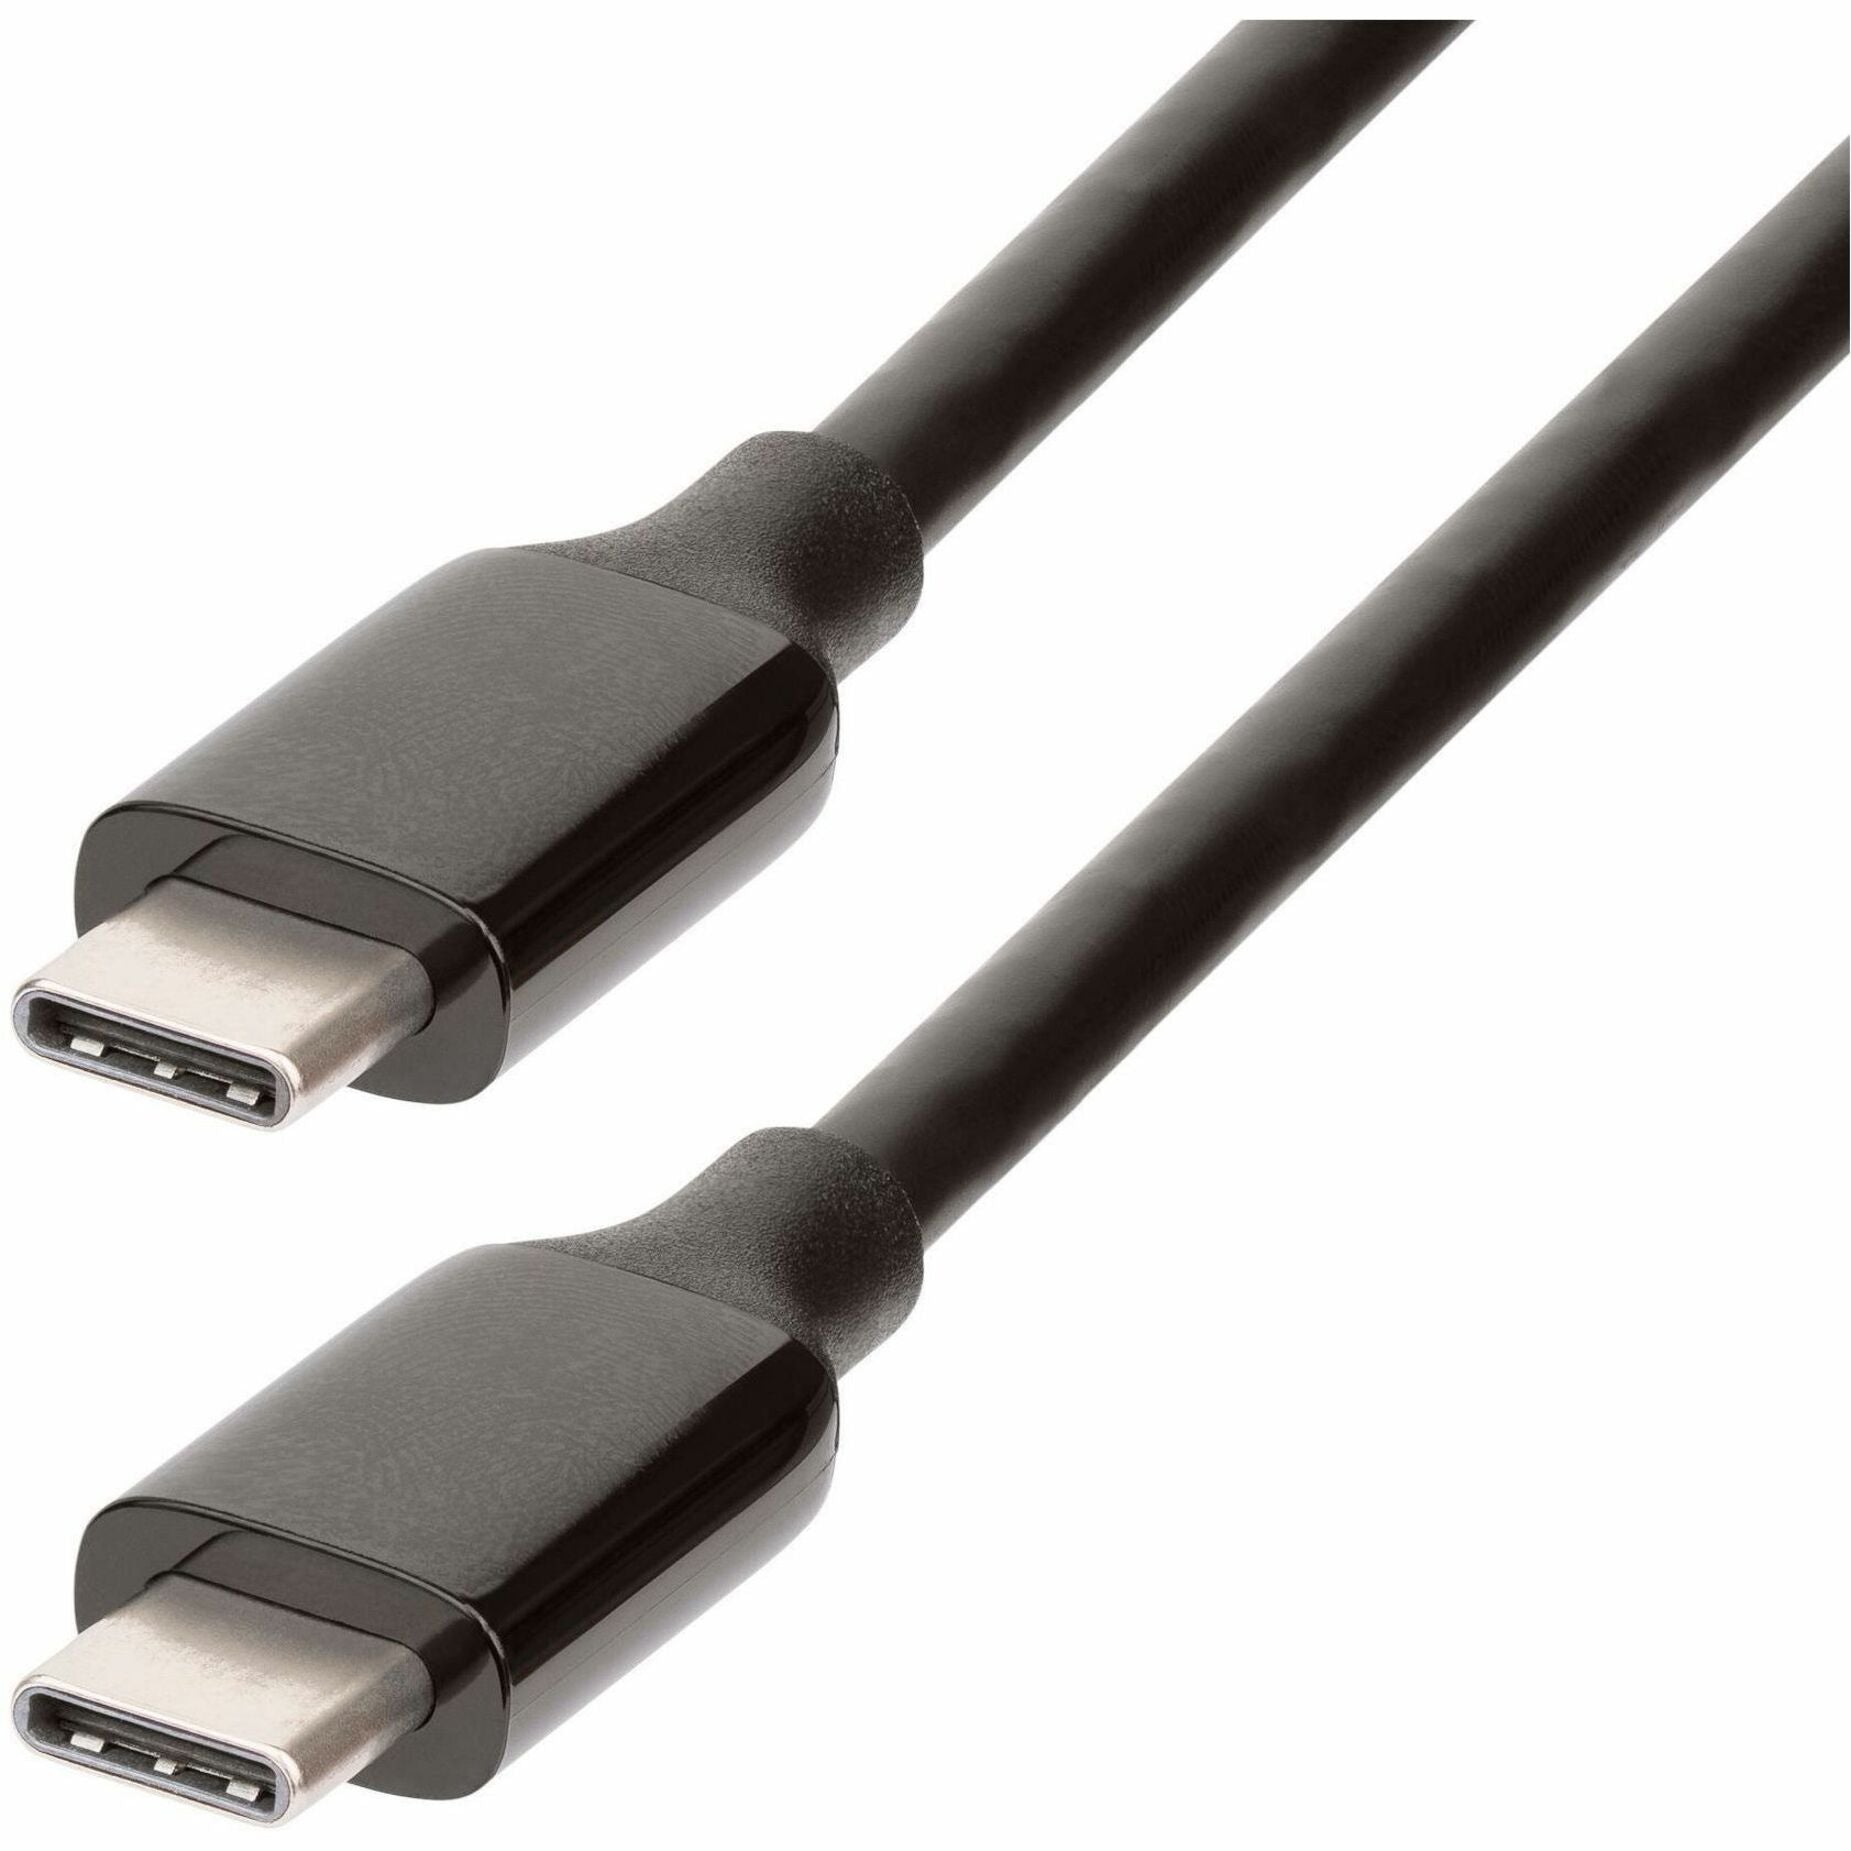 StarTech.com UCC-3M-10G-USB-CABLE USB-C Data Transfer Cable, 10 Gbit/s, 9.84 ft